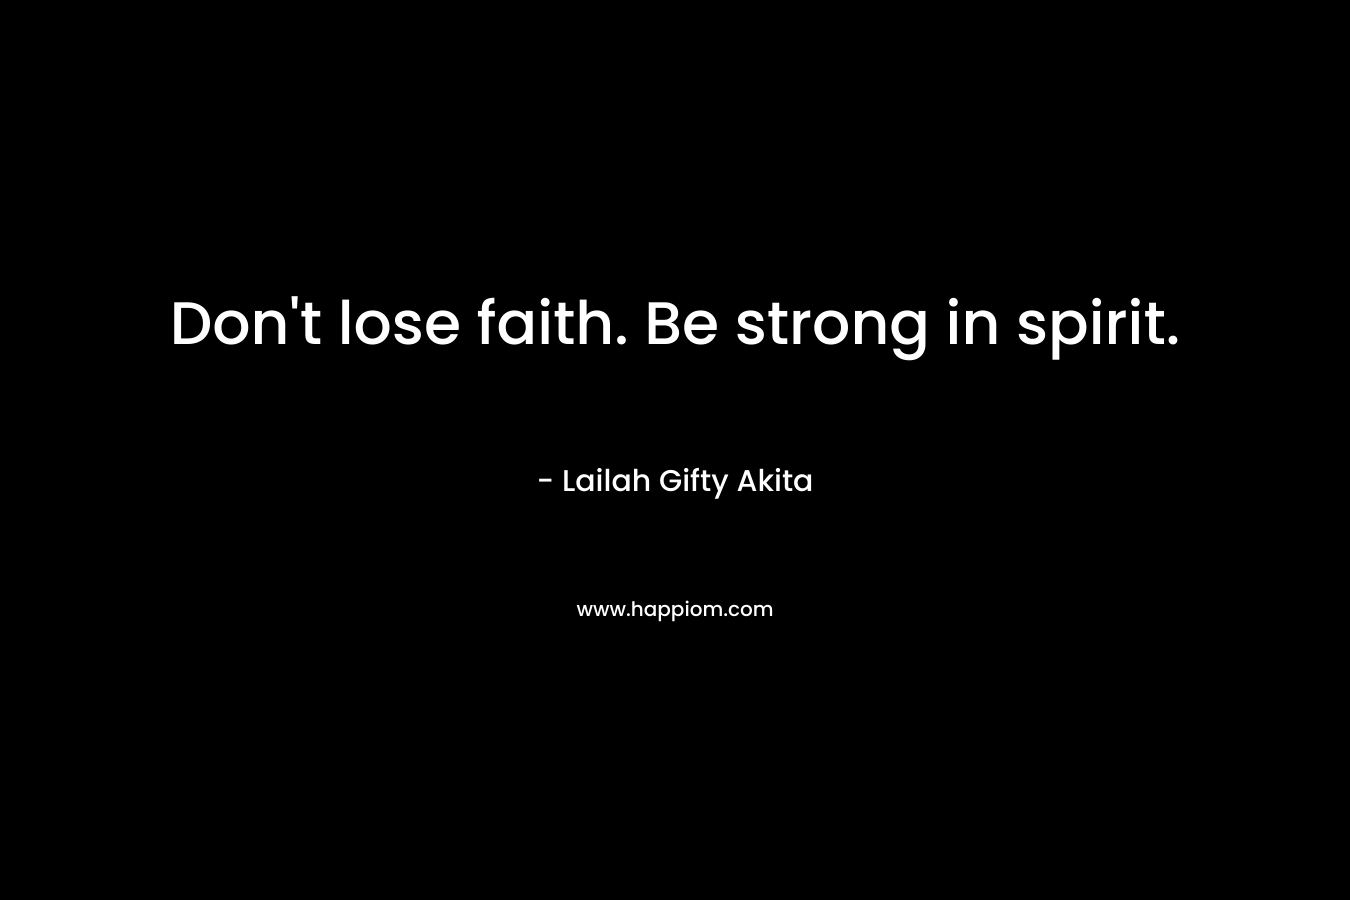 Don't lose faith. Be strong in spirit.